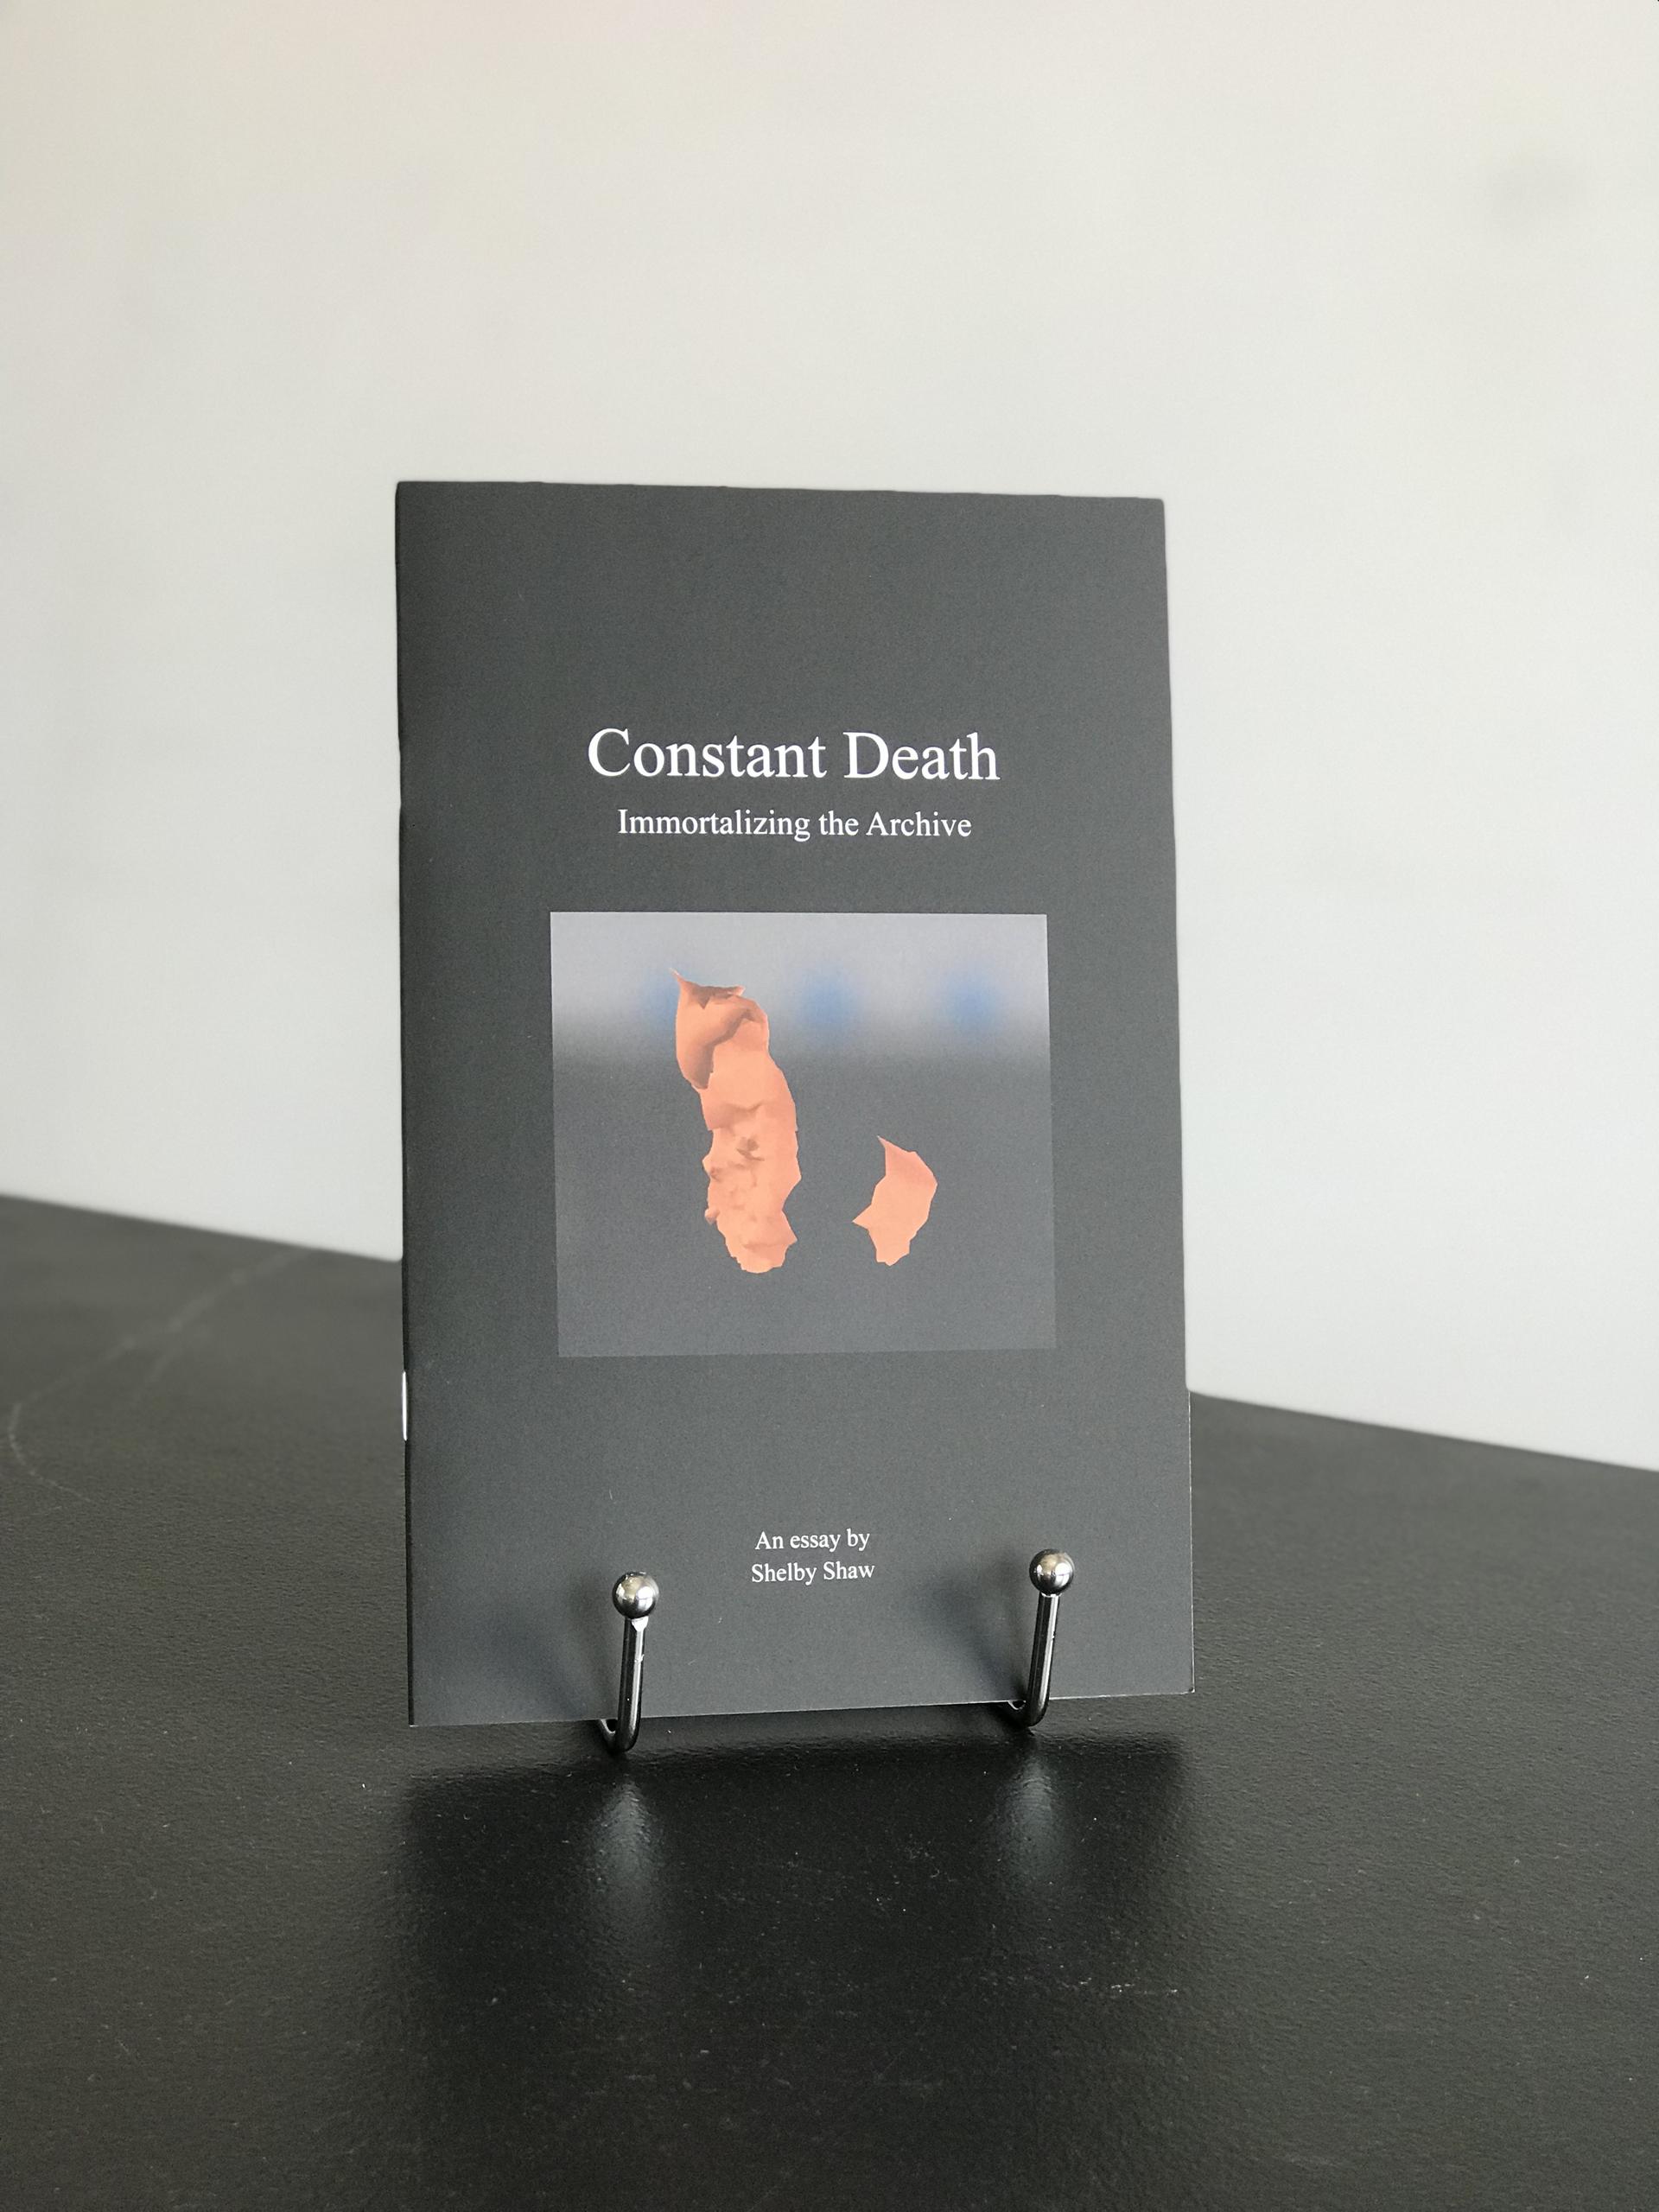 The book 'Constant Death' which is black with white font for the title placed above an inserted image of a strange brown shape on a blue background, is displayed on a silver book stand atop a black tabletop with a white wall in the background.